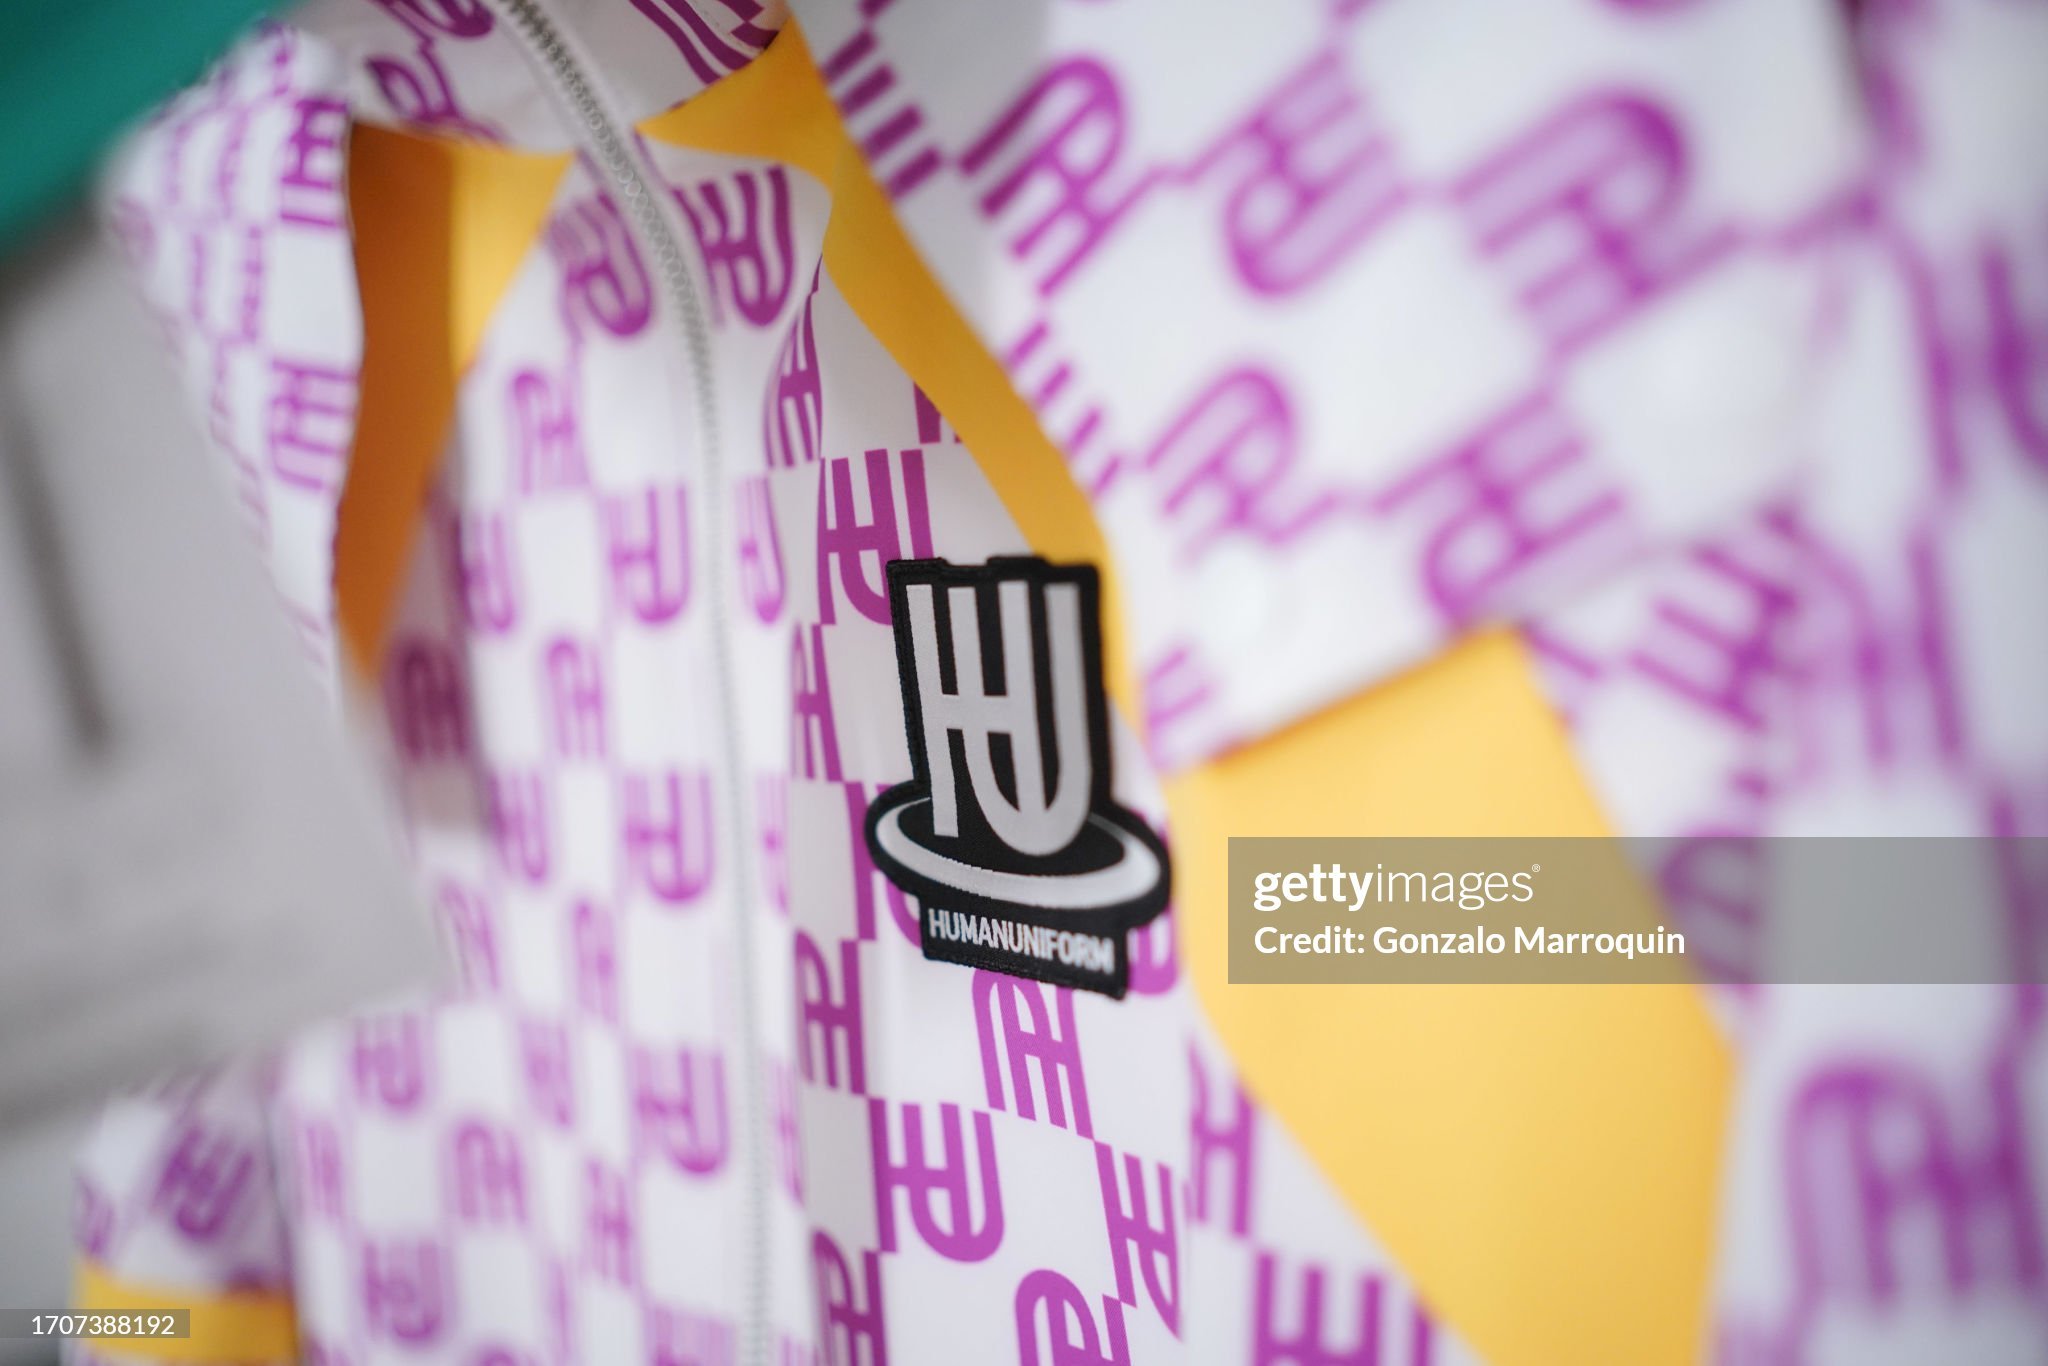 gettyimages-1707388192-2048x2048.jpg